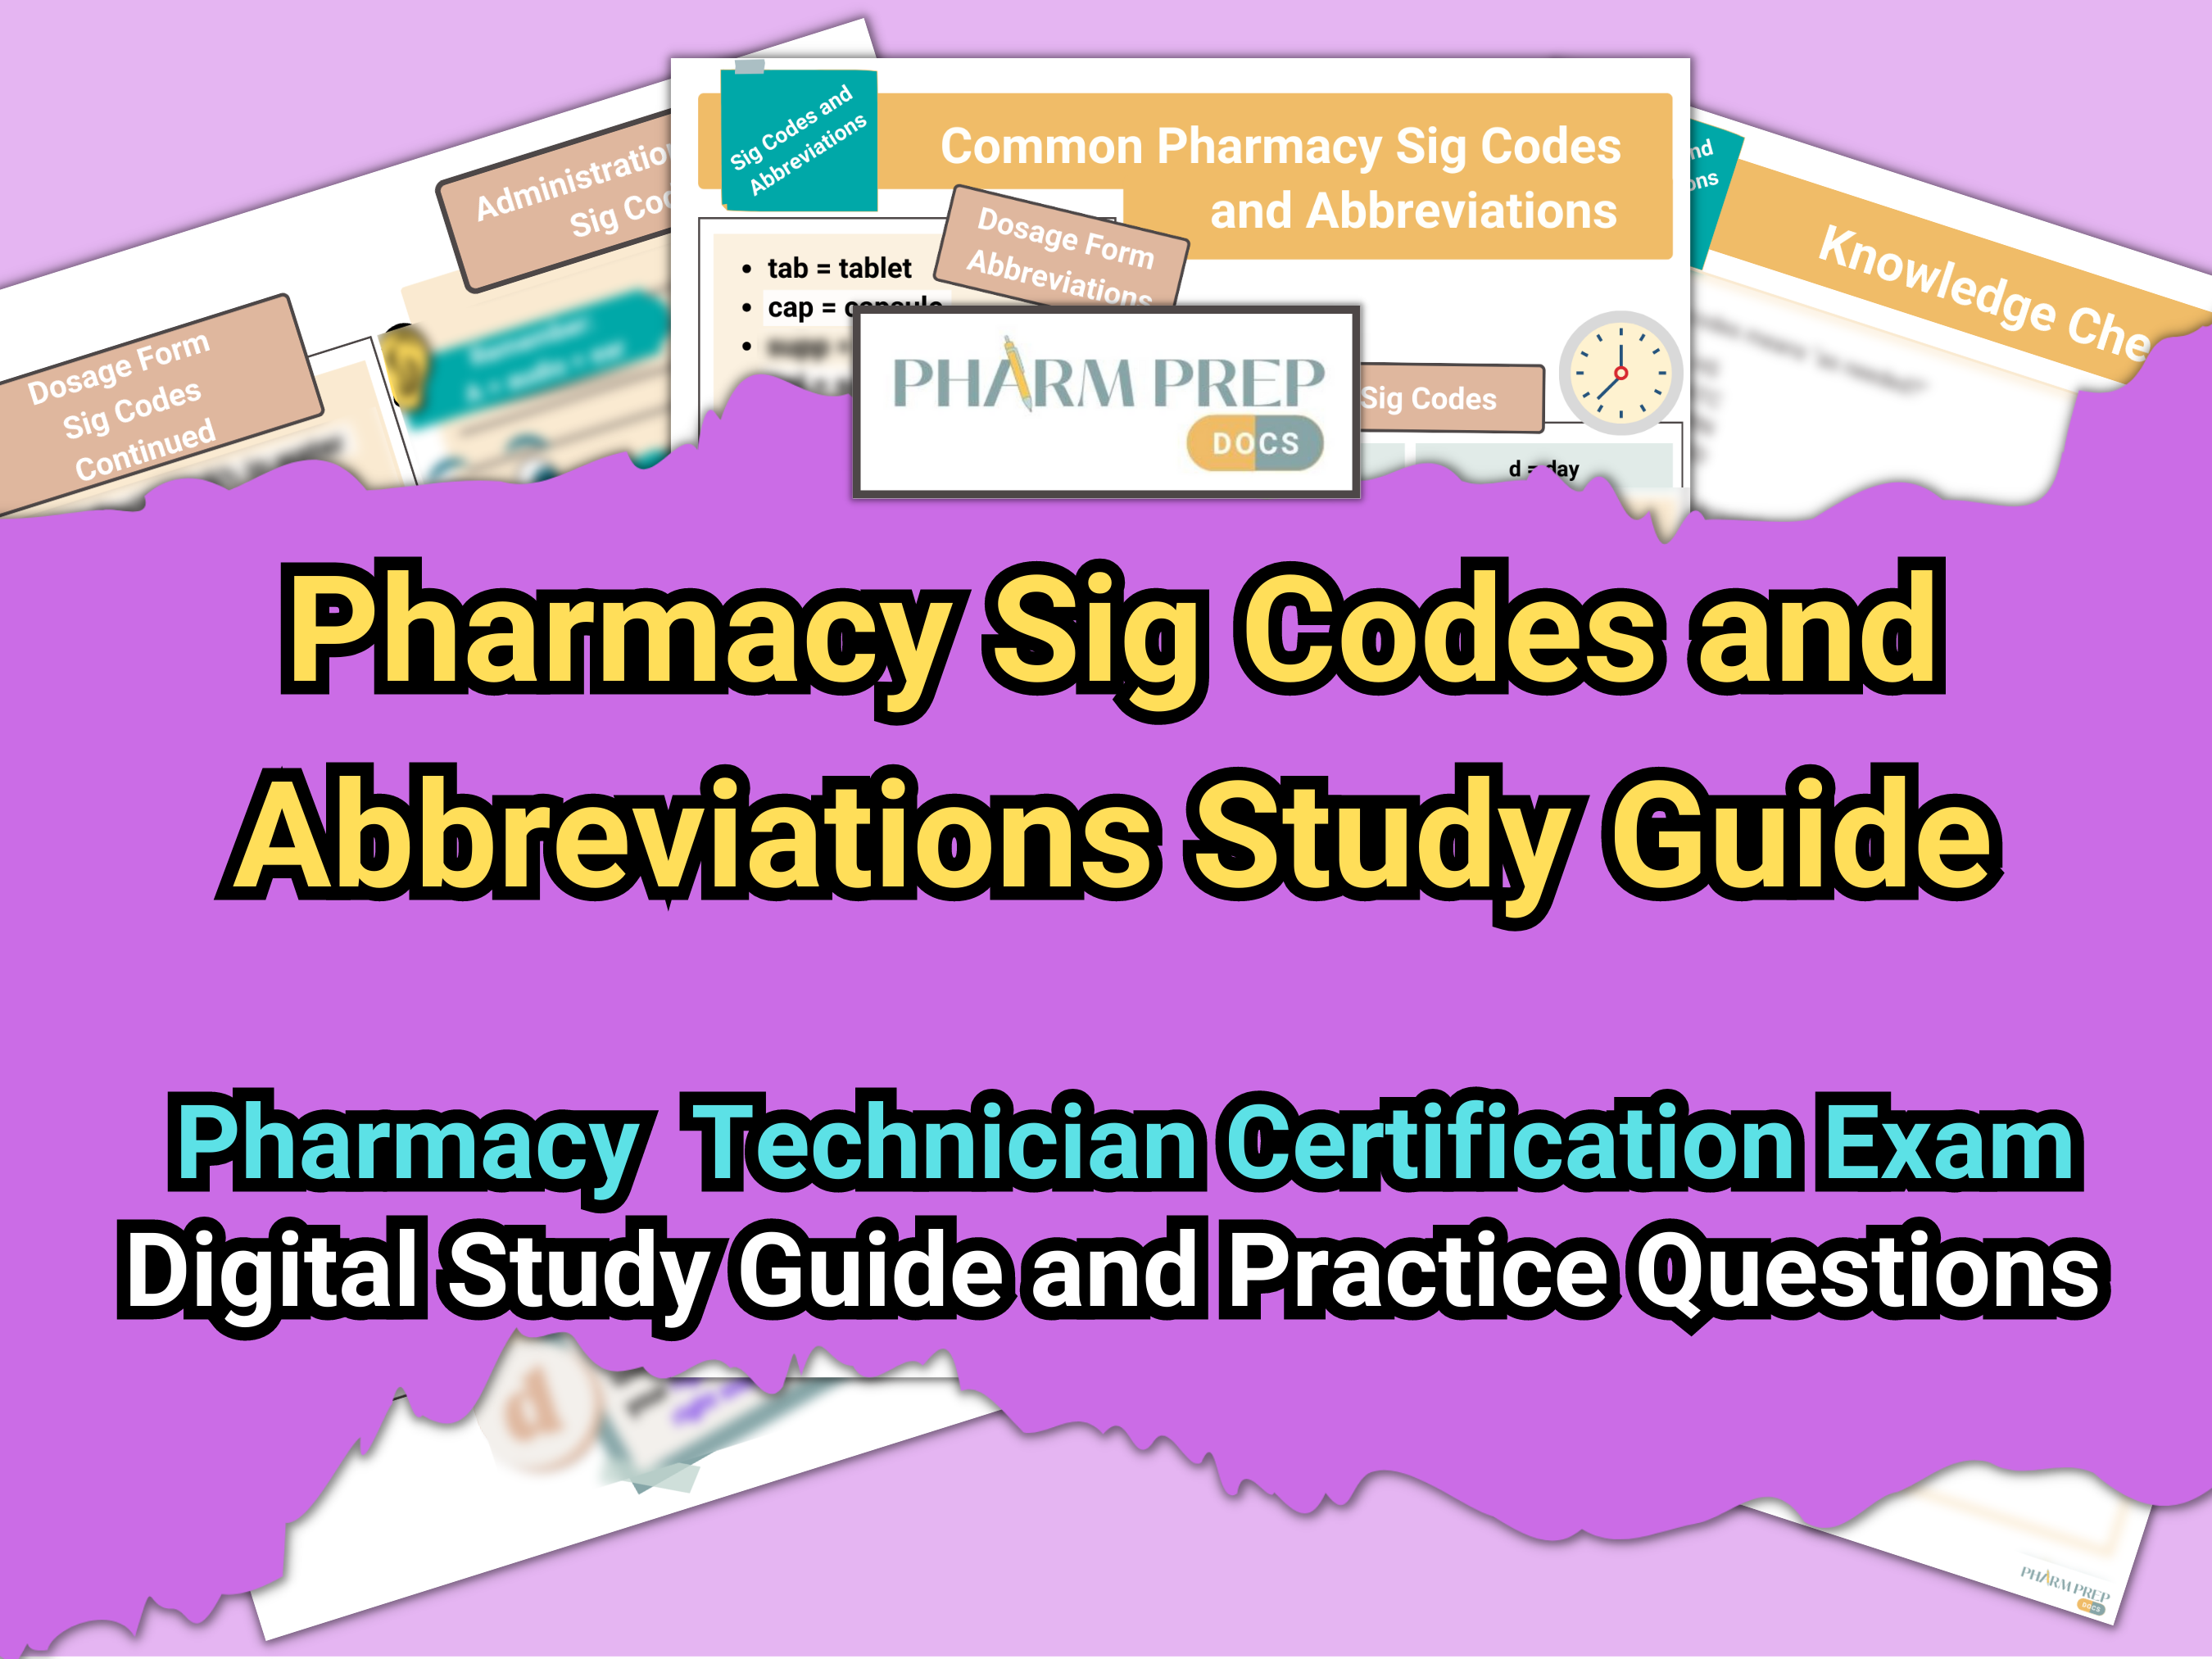 Free Study Guide: Pharmacy Sig Codes and Abbreviations Pharmacy Technician Certification Exam (PTCB, PTCE, ExCPT)